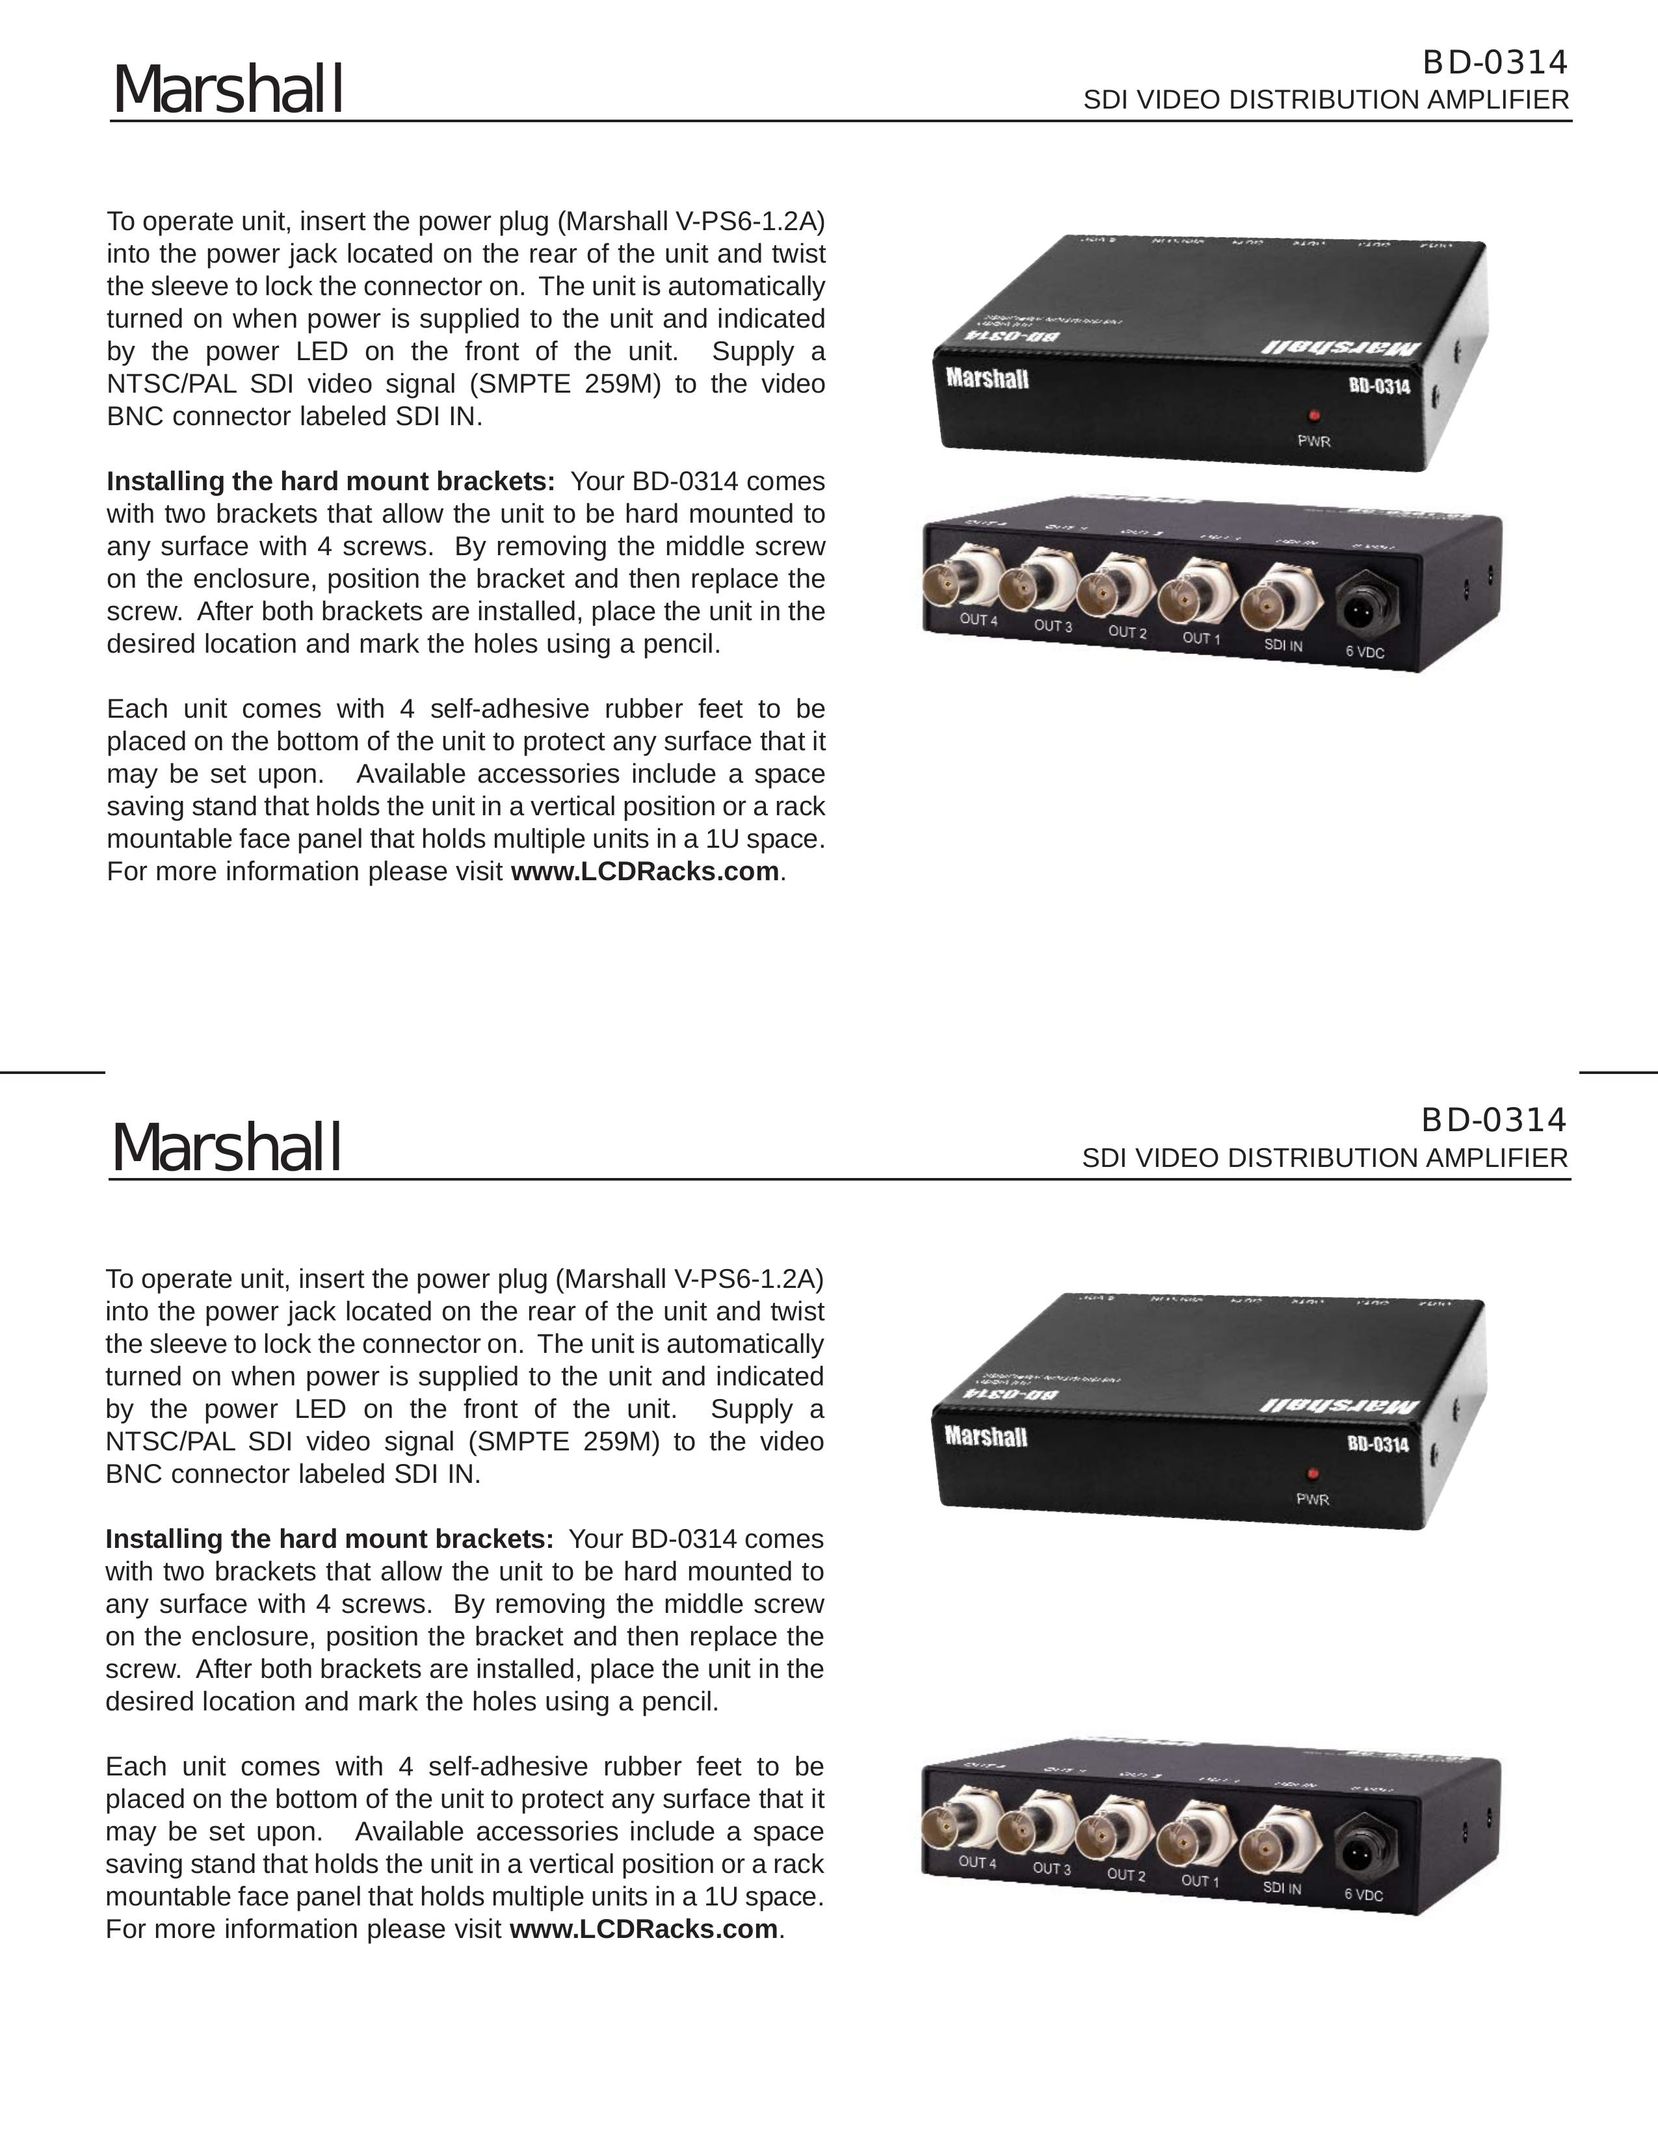 Marshall Amplification BD-0314 Home Theater Server User Manual